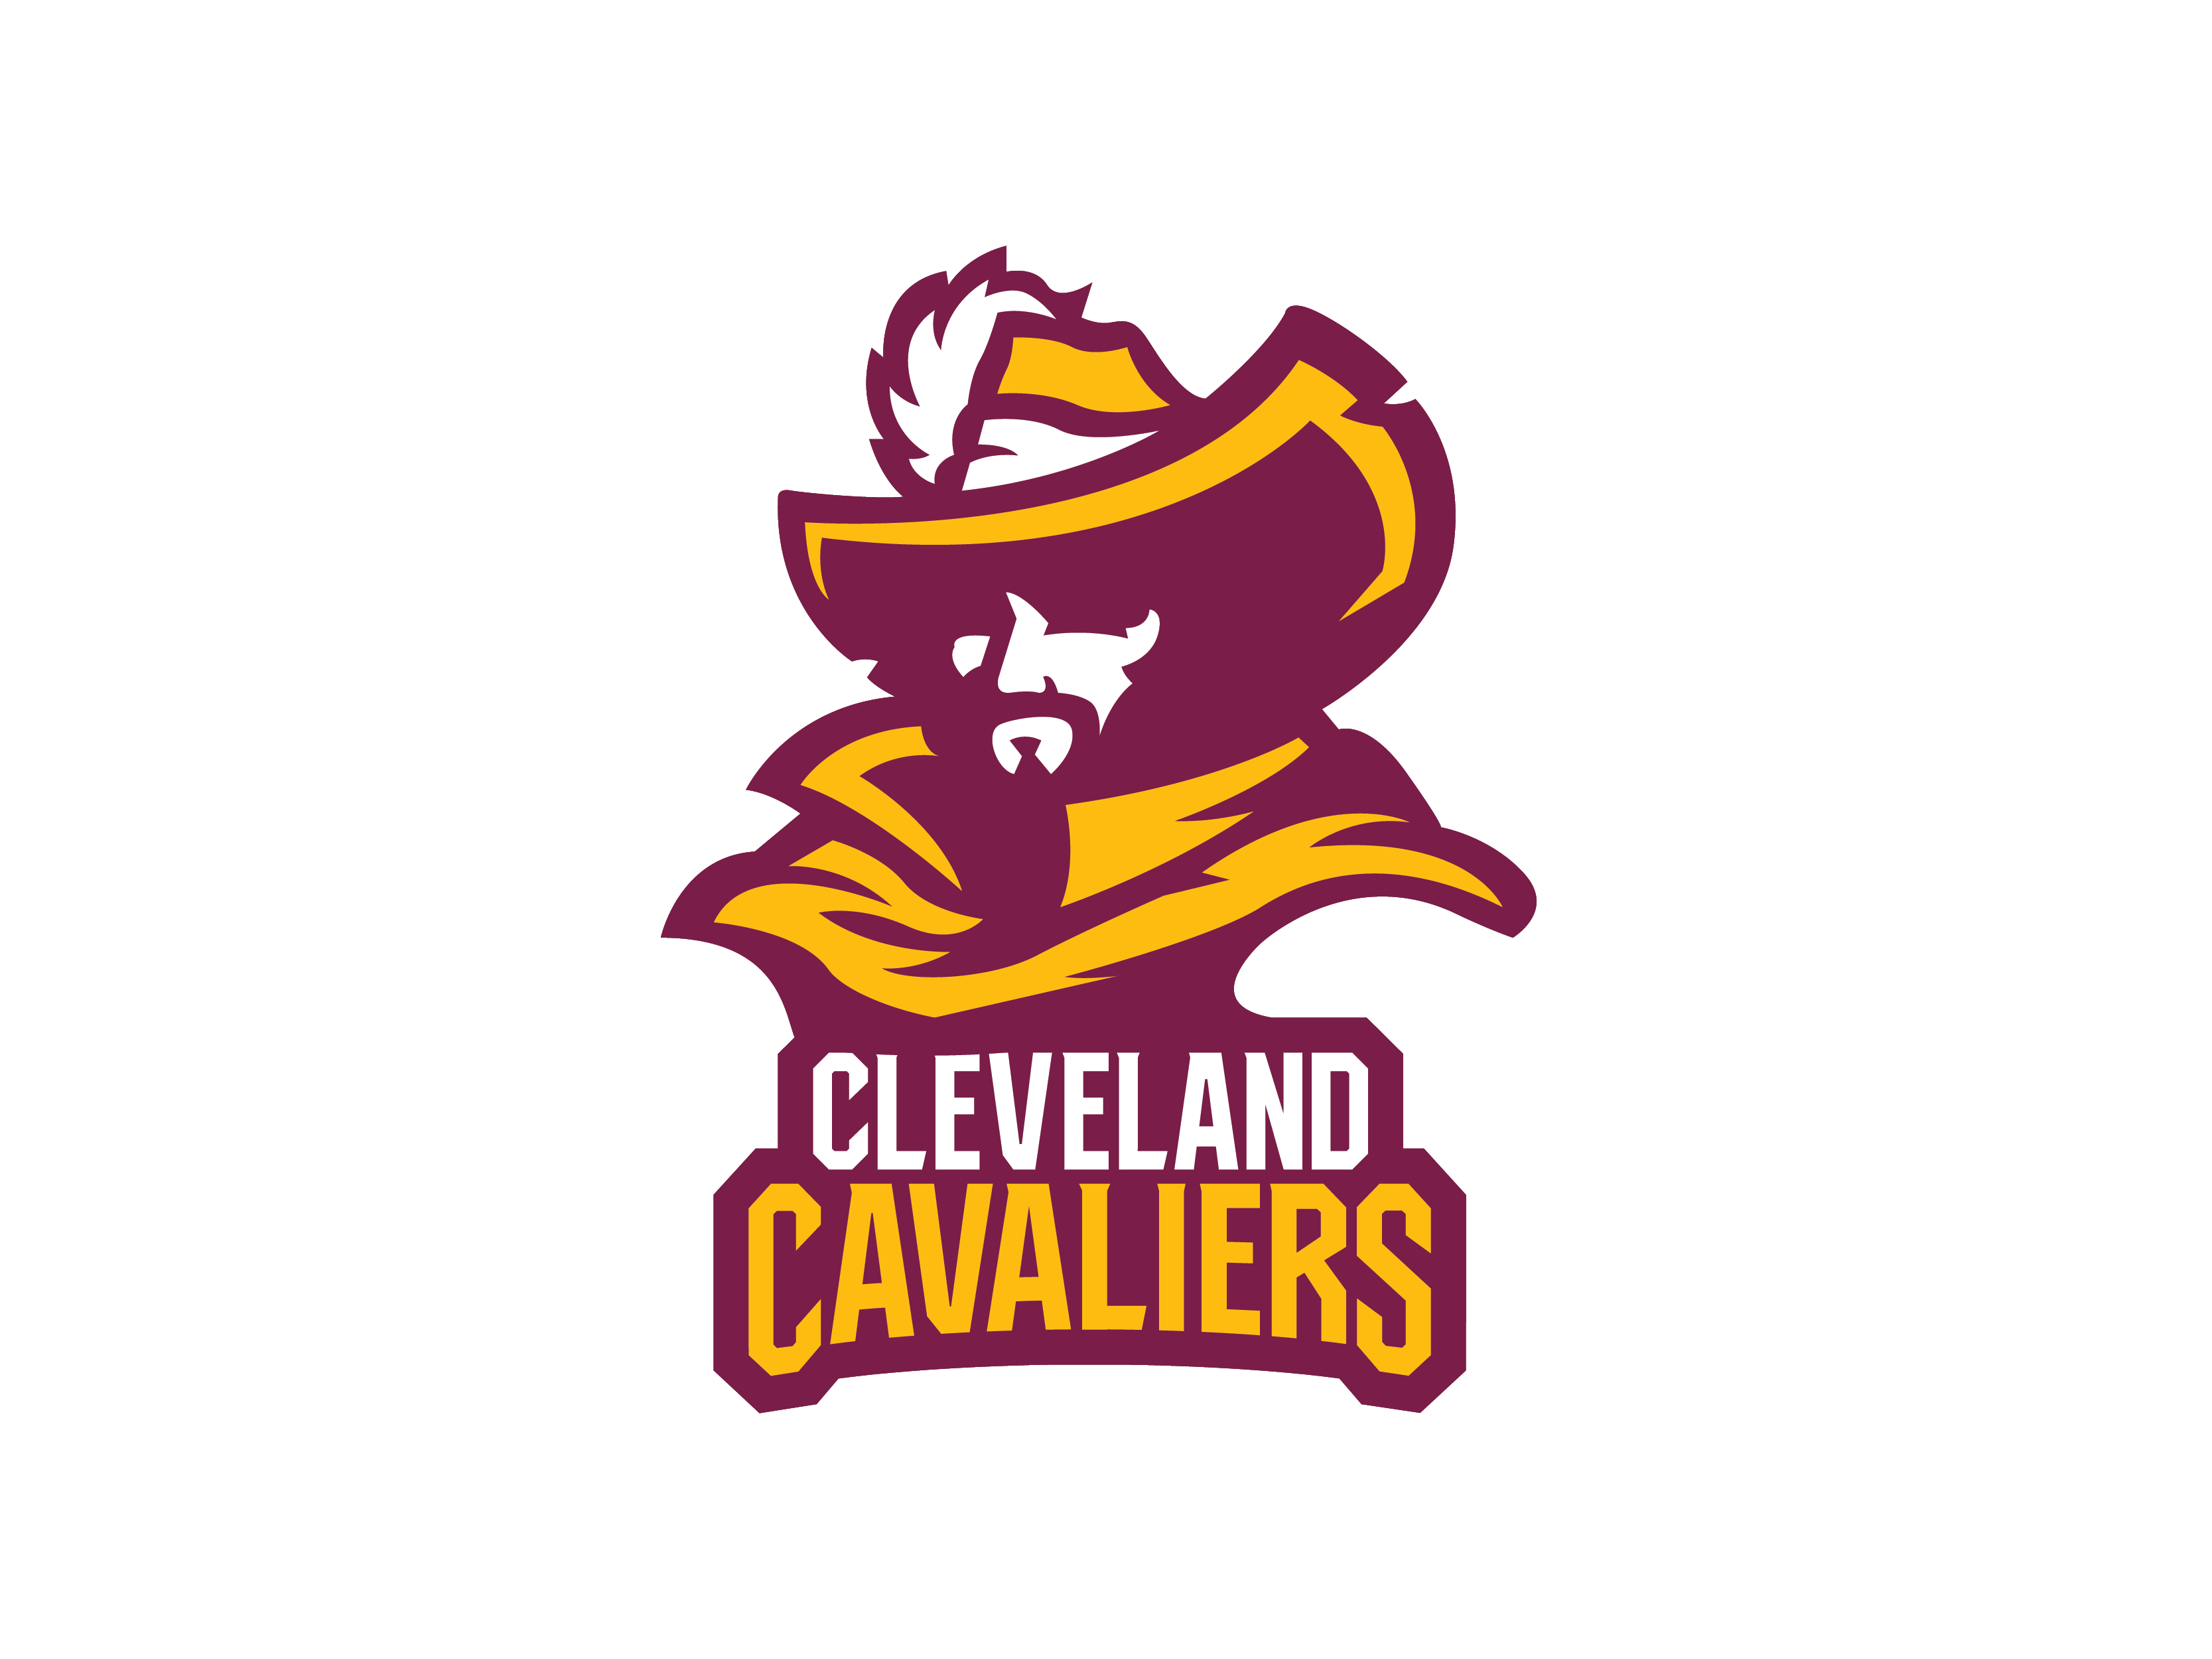 Cleveland Cavaliers Concept Logo by Paul Schreel on Dribbble